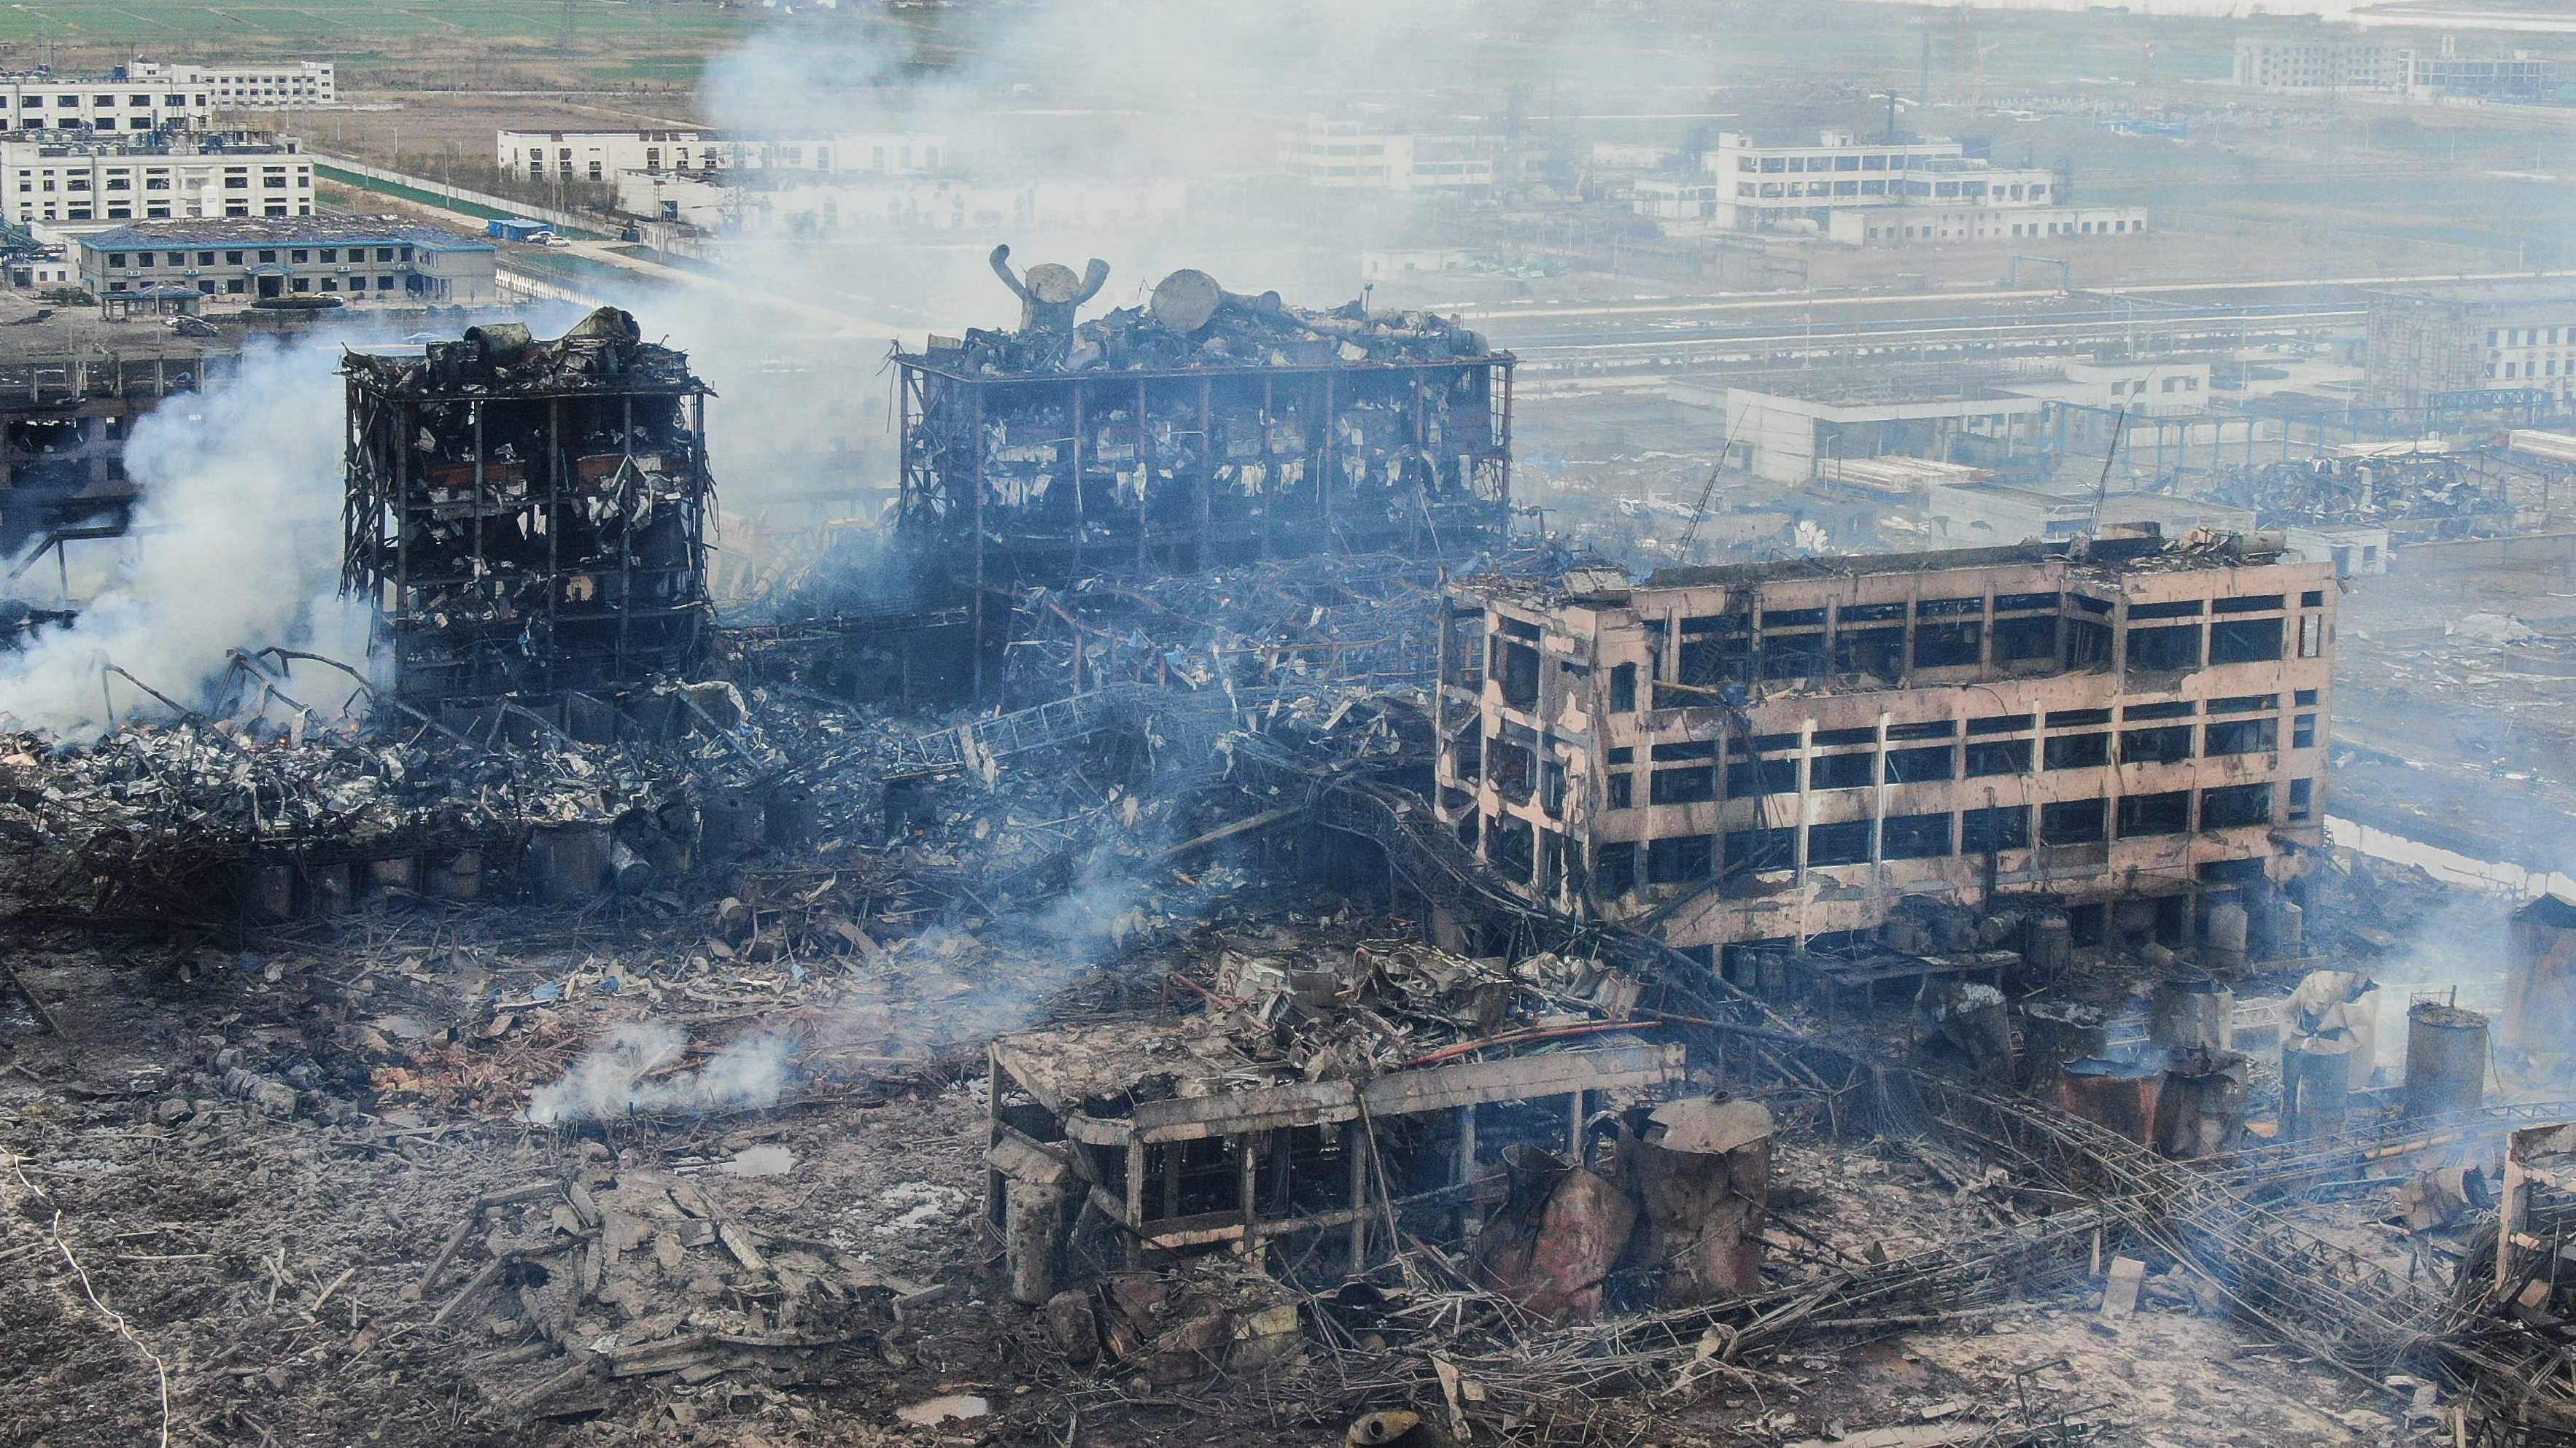 This file picture taken on March 22, 2019 shows an aerial view of damaged buildings after an explosion at a chemical plant in Yancheng in China's eastern Jiangsu province. Credit: AFP Photo